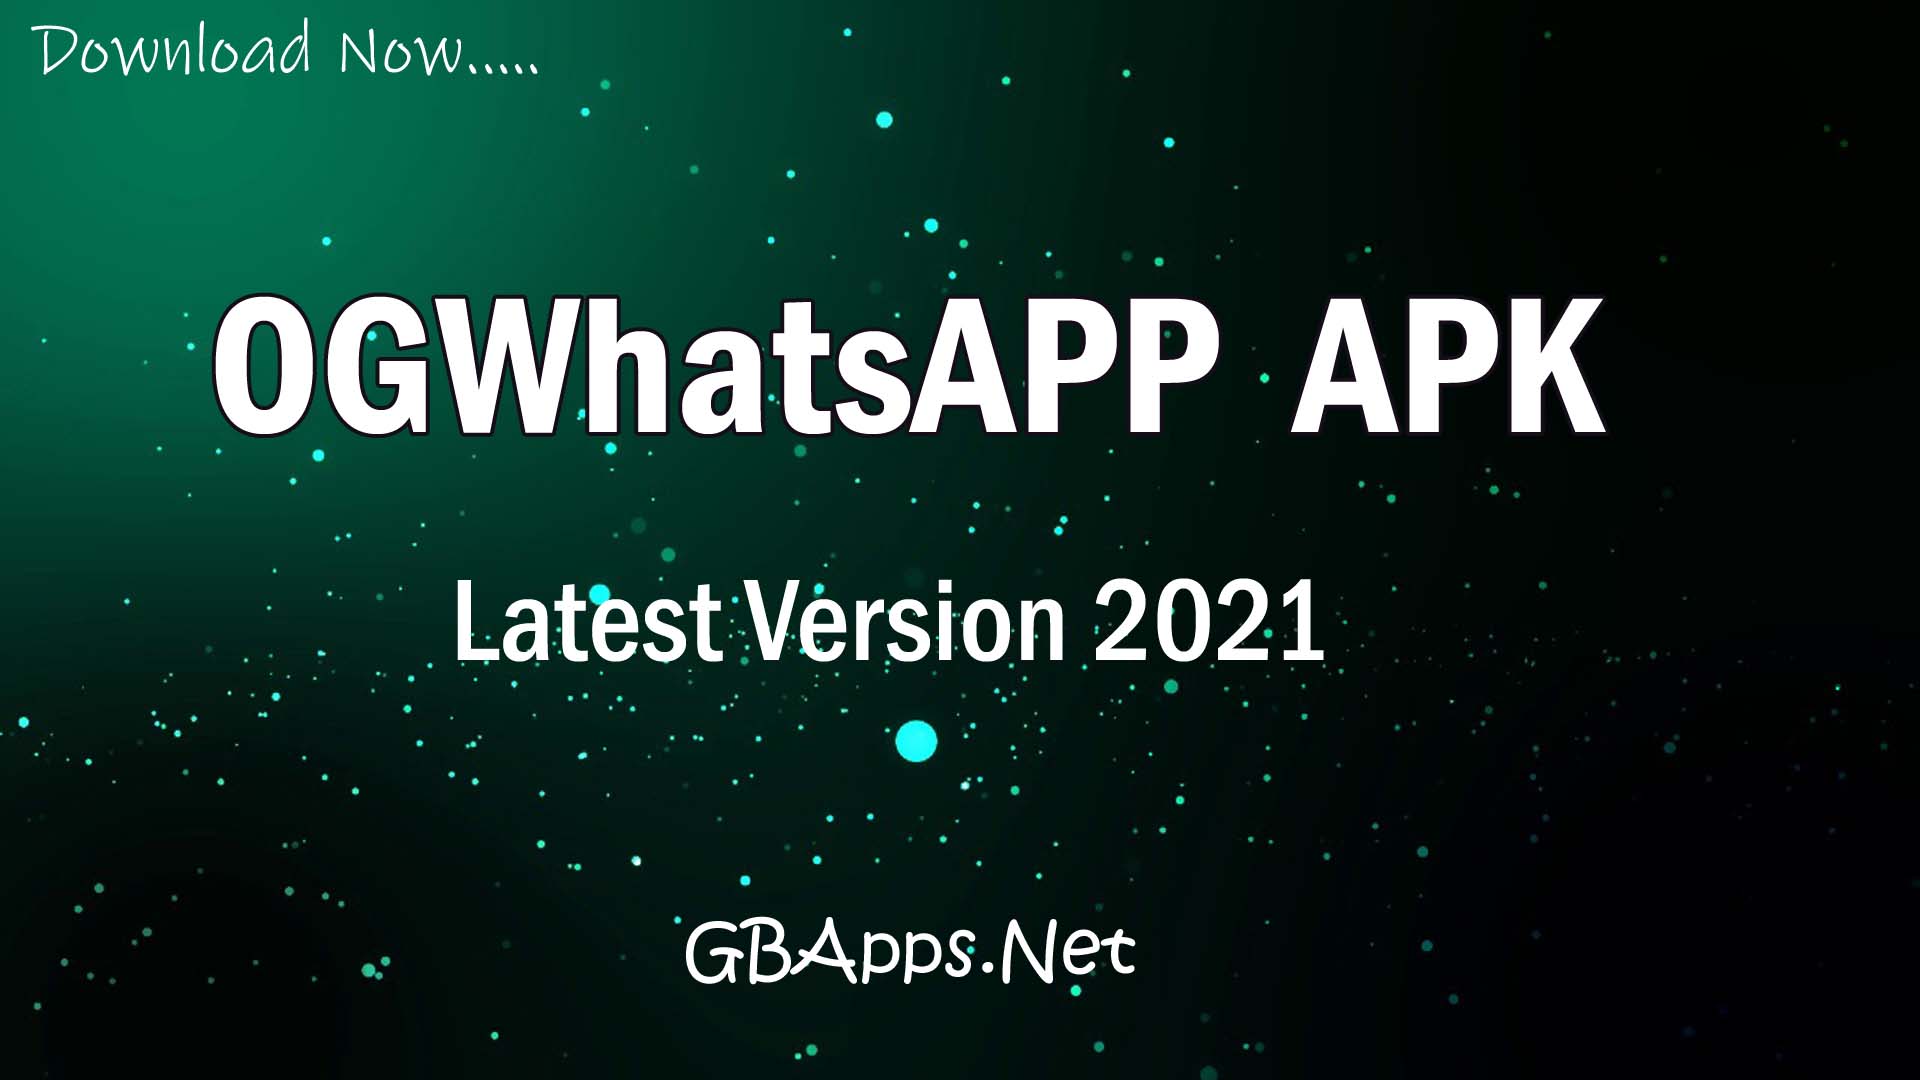 Ogwhatsapp Apk Download Official Latest Version July 2021